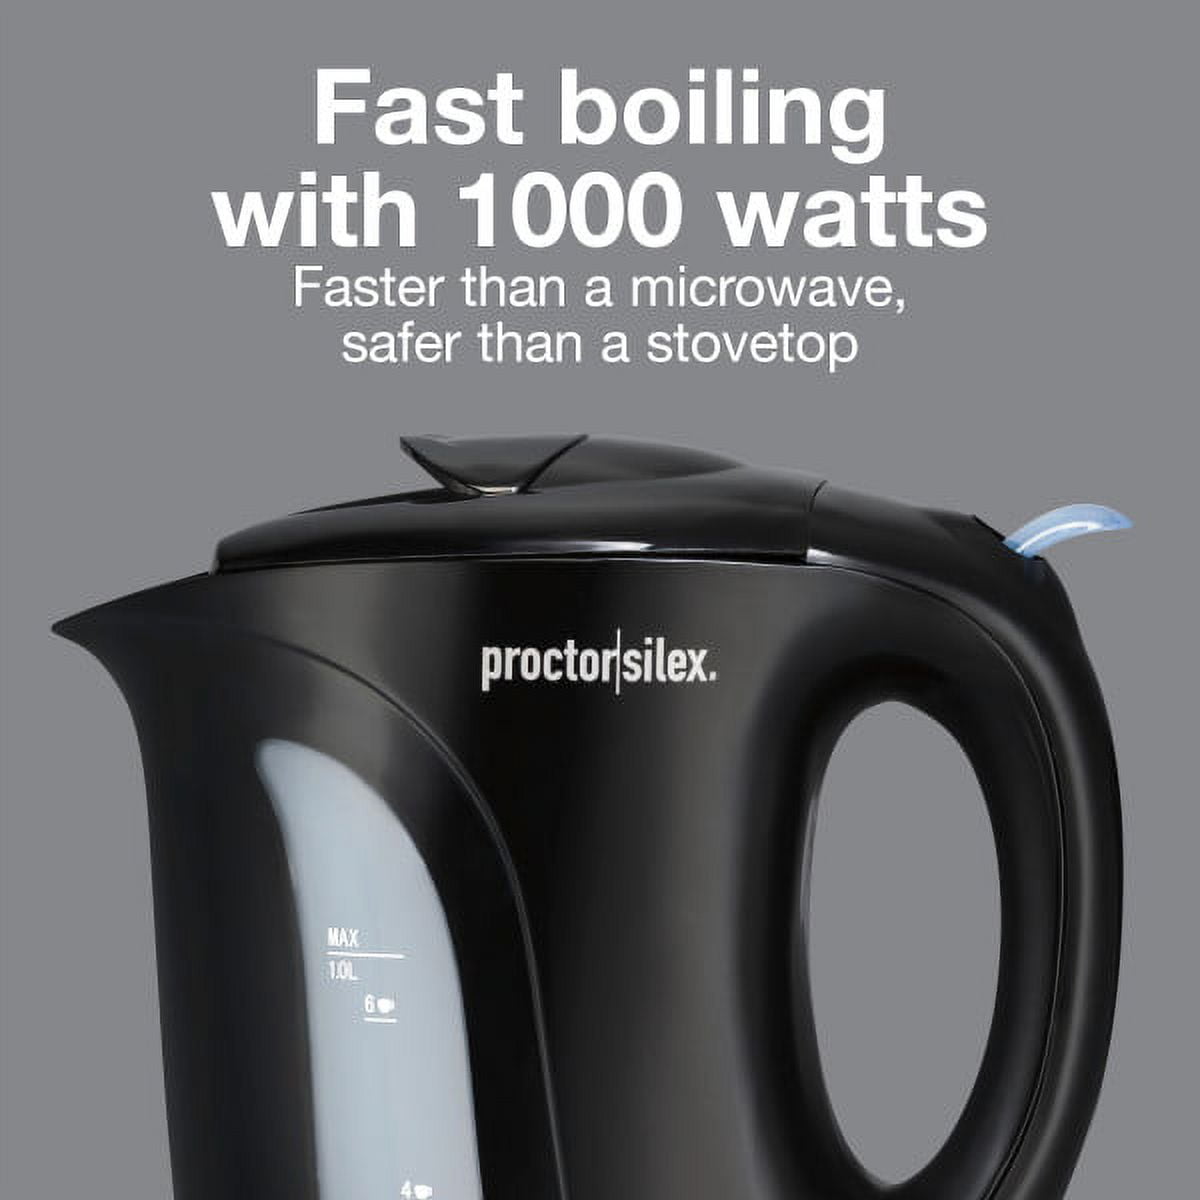 1 Liter Electric Kettle with Boil-Dry Protection - Model K2070PS